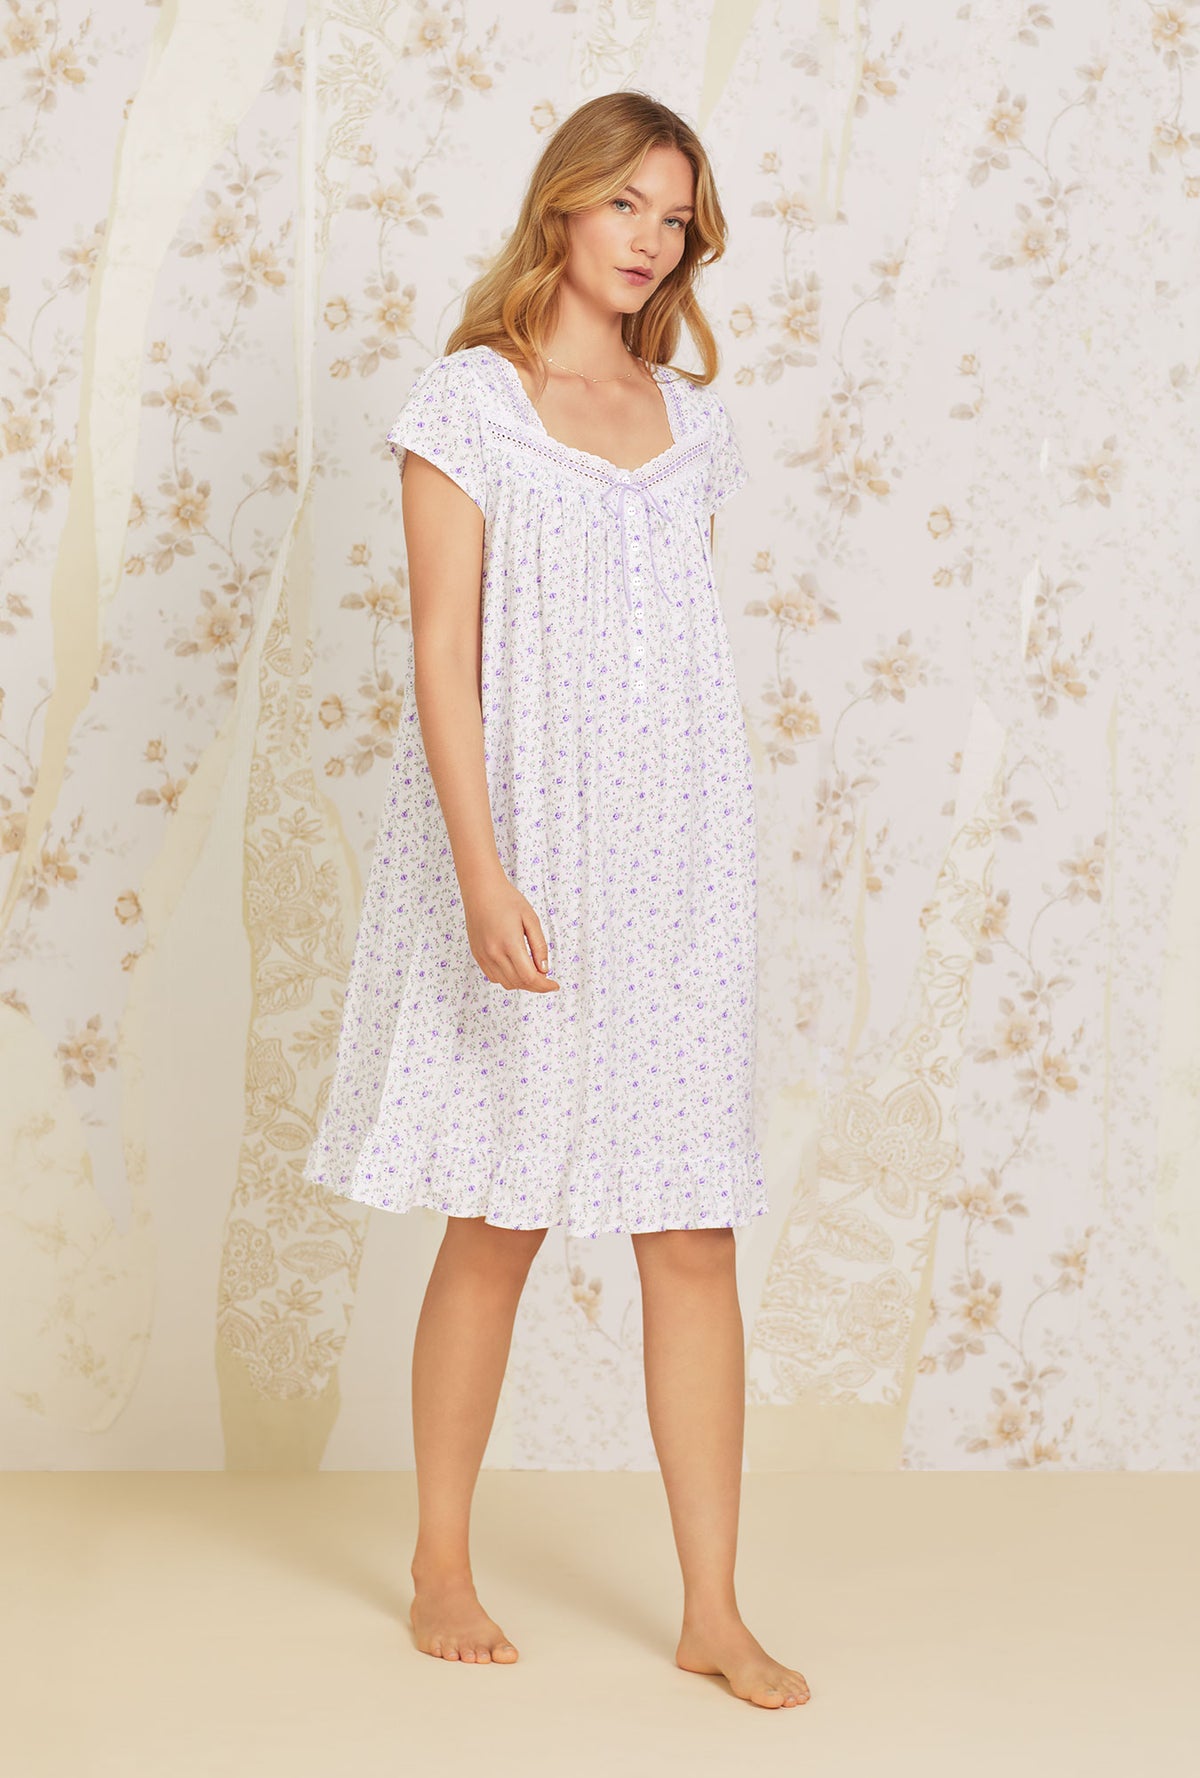 A lady wearing white short sleeve  Cotton Knit Nightgown with Lavender Garden  print